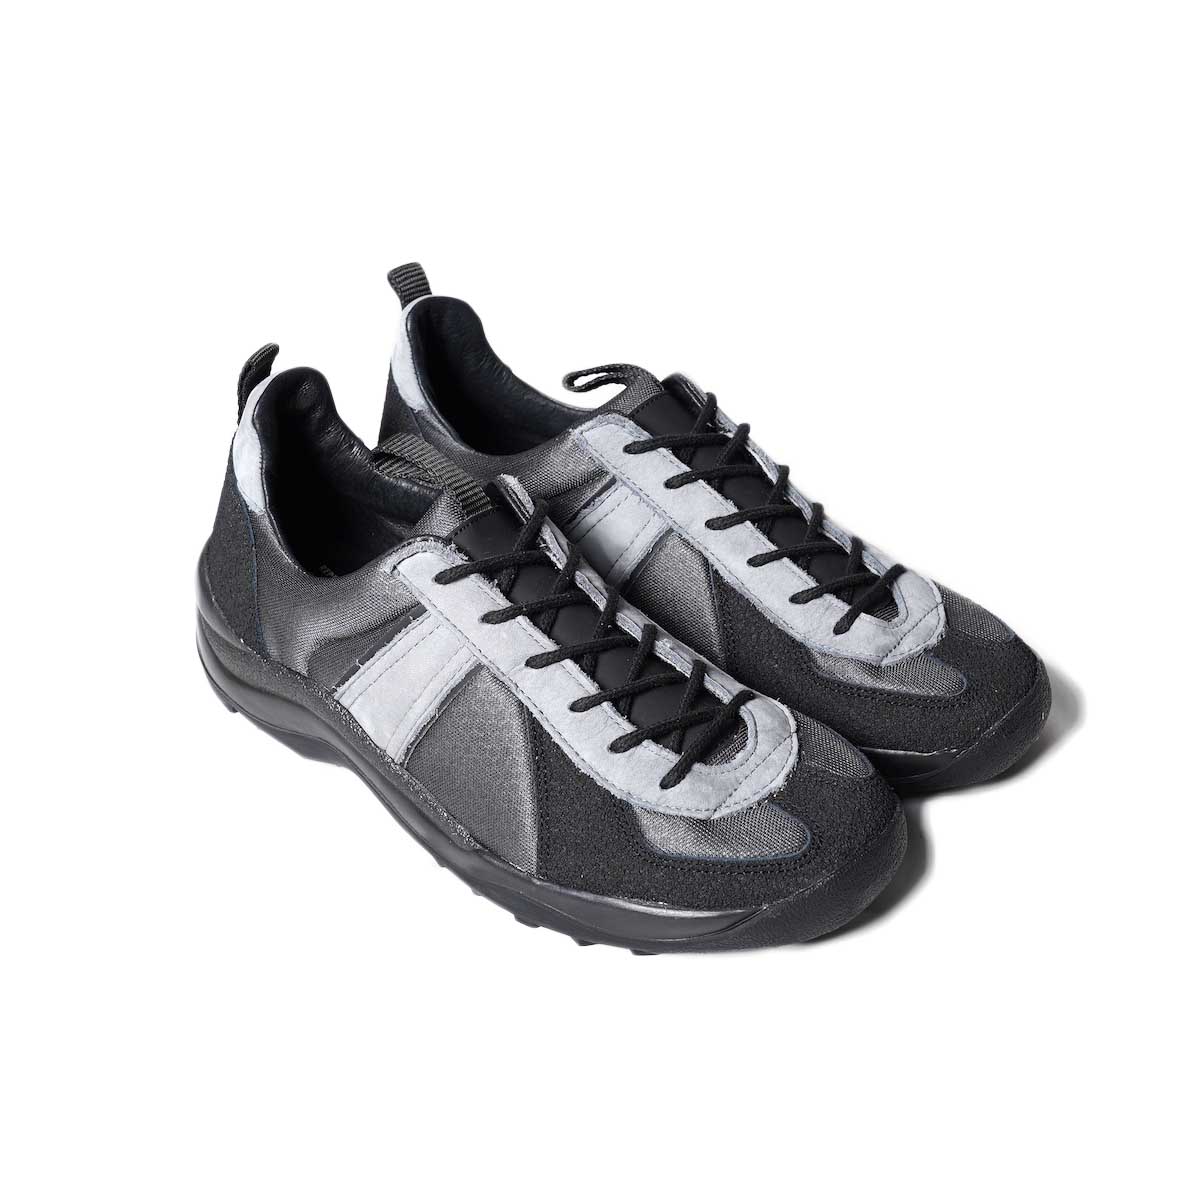 REPRODUCTION OF FOUND / GERMAN MILITARY TRAINER (Dark Gray / Gray)